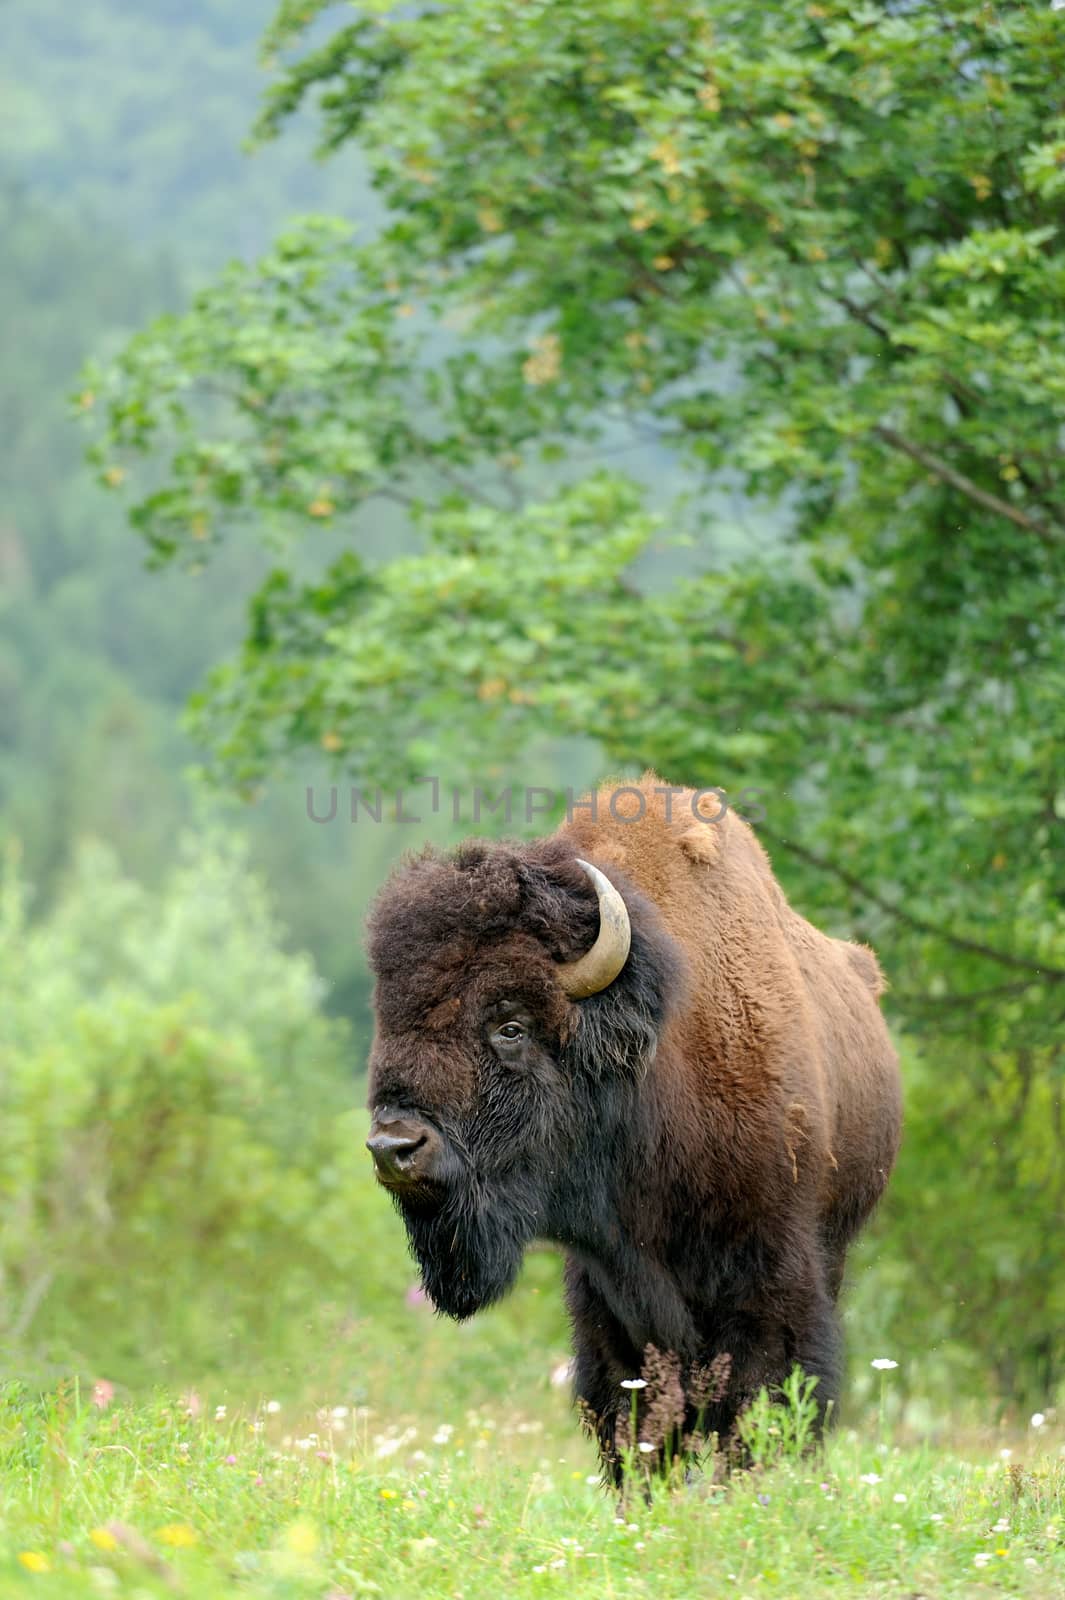 Large male of bison in the forest